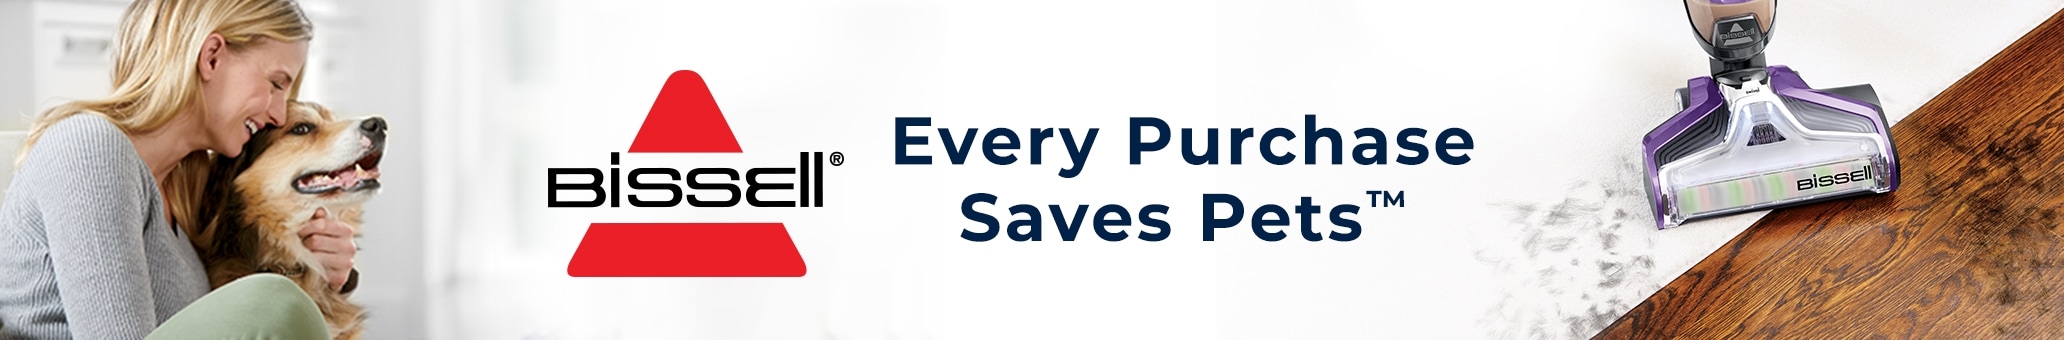 Bissell. Every Purchase Saves Pets.